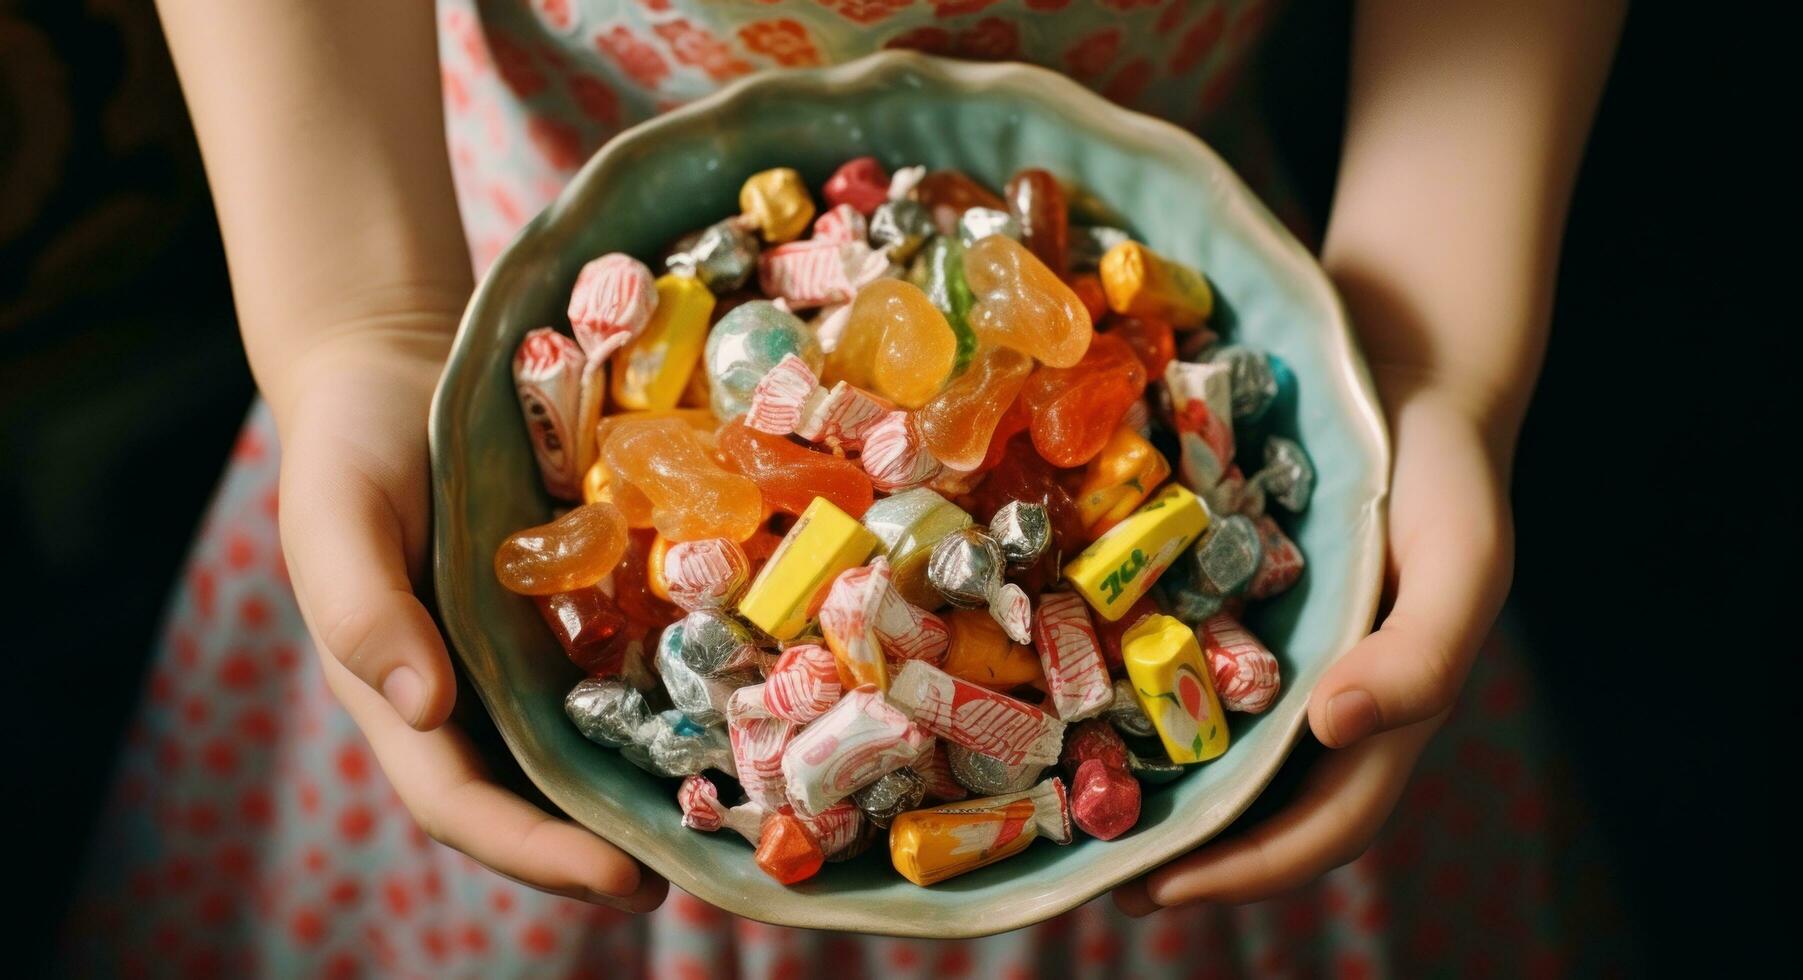 AI generated children's hands holding a large bowl of candy photo